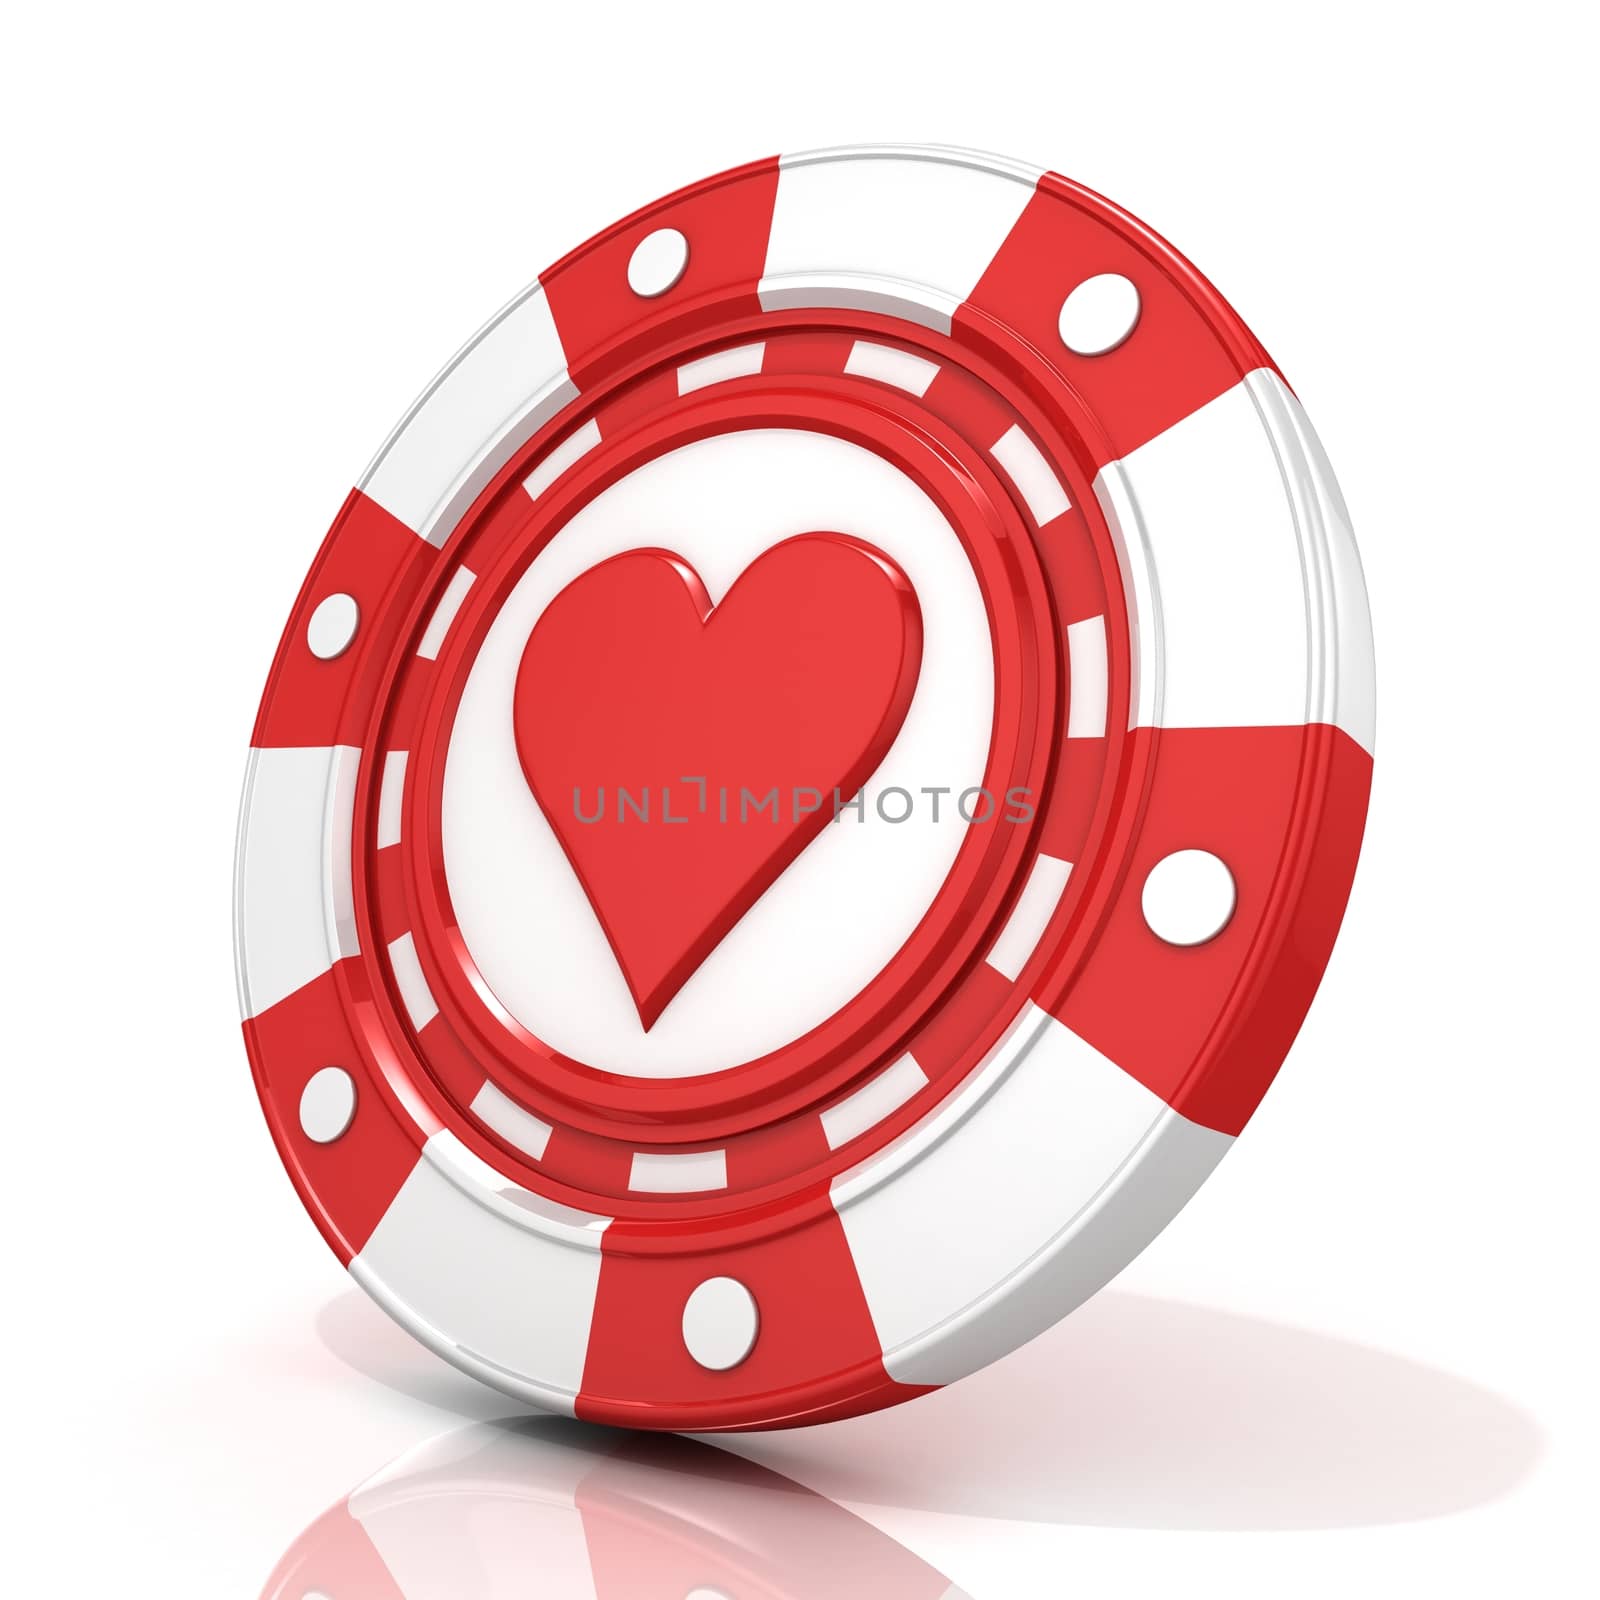 Red gambling chip with heart sign on it. 3D render isolated on white background